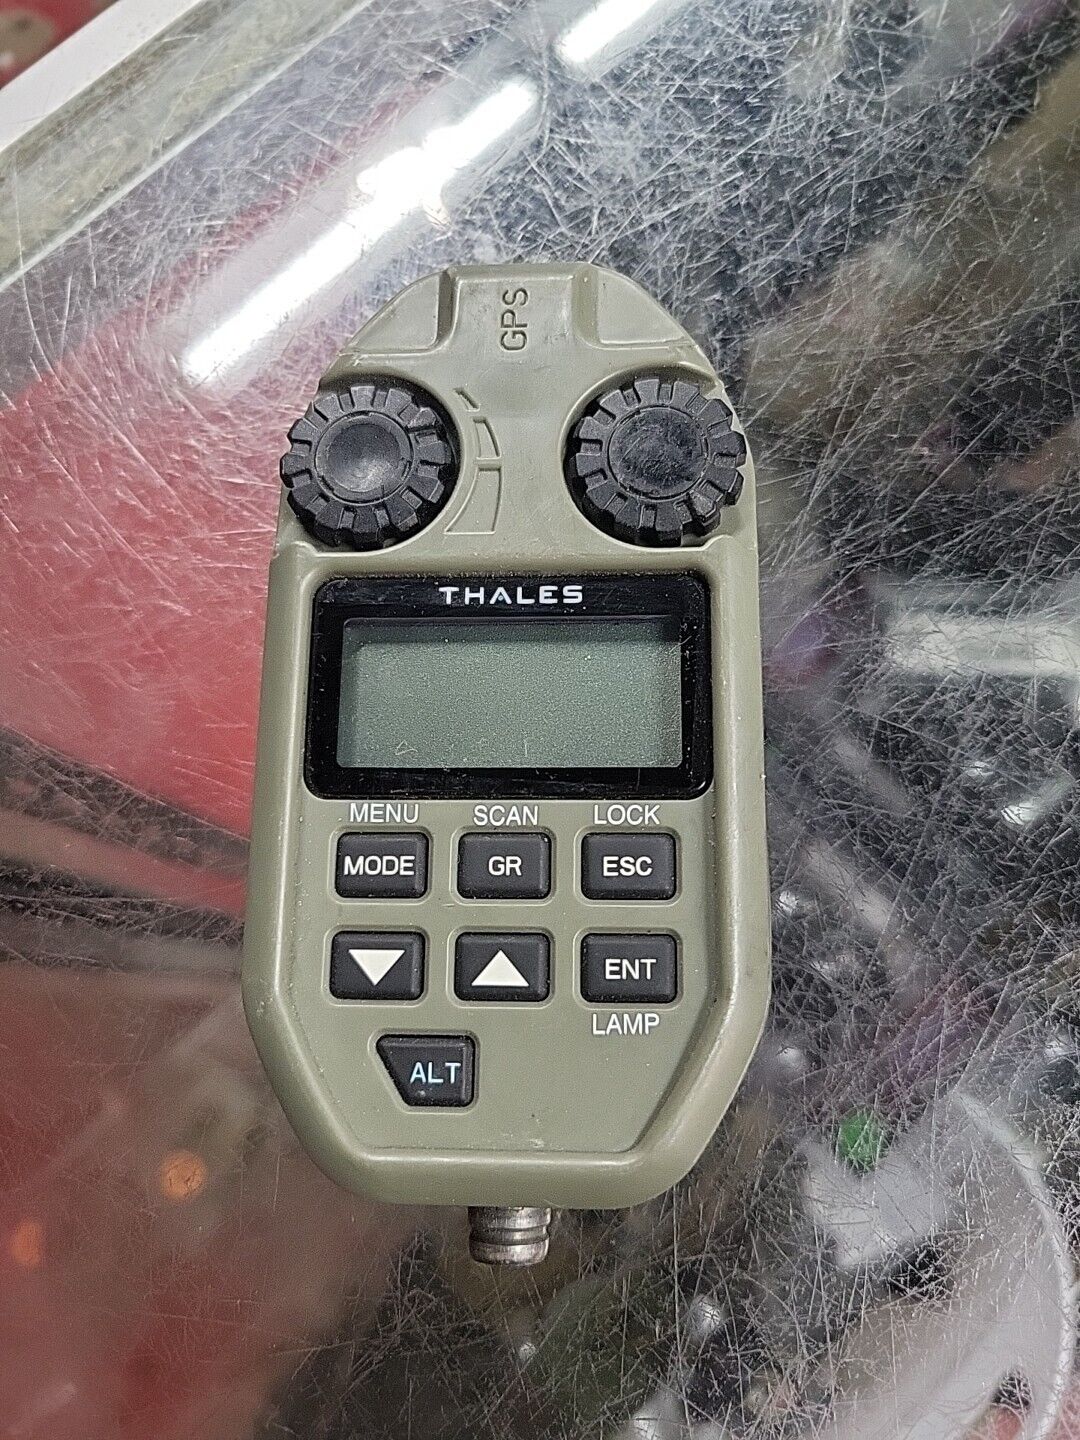 Thales MA6795 remote control with GPS system